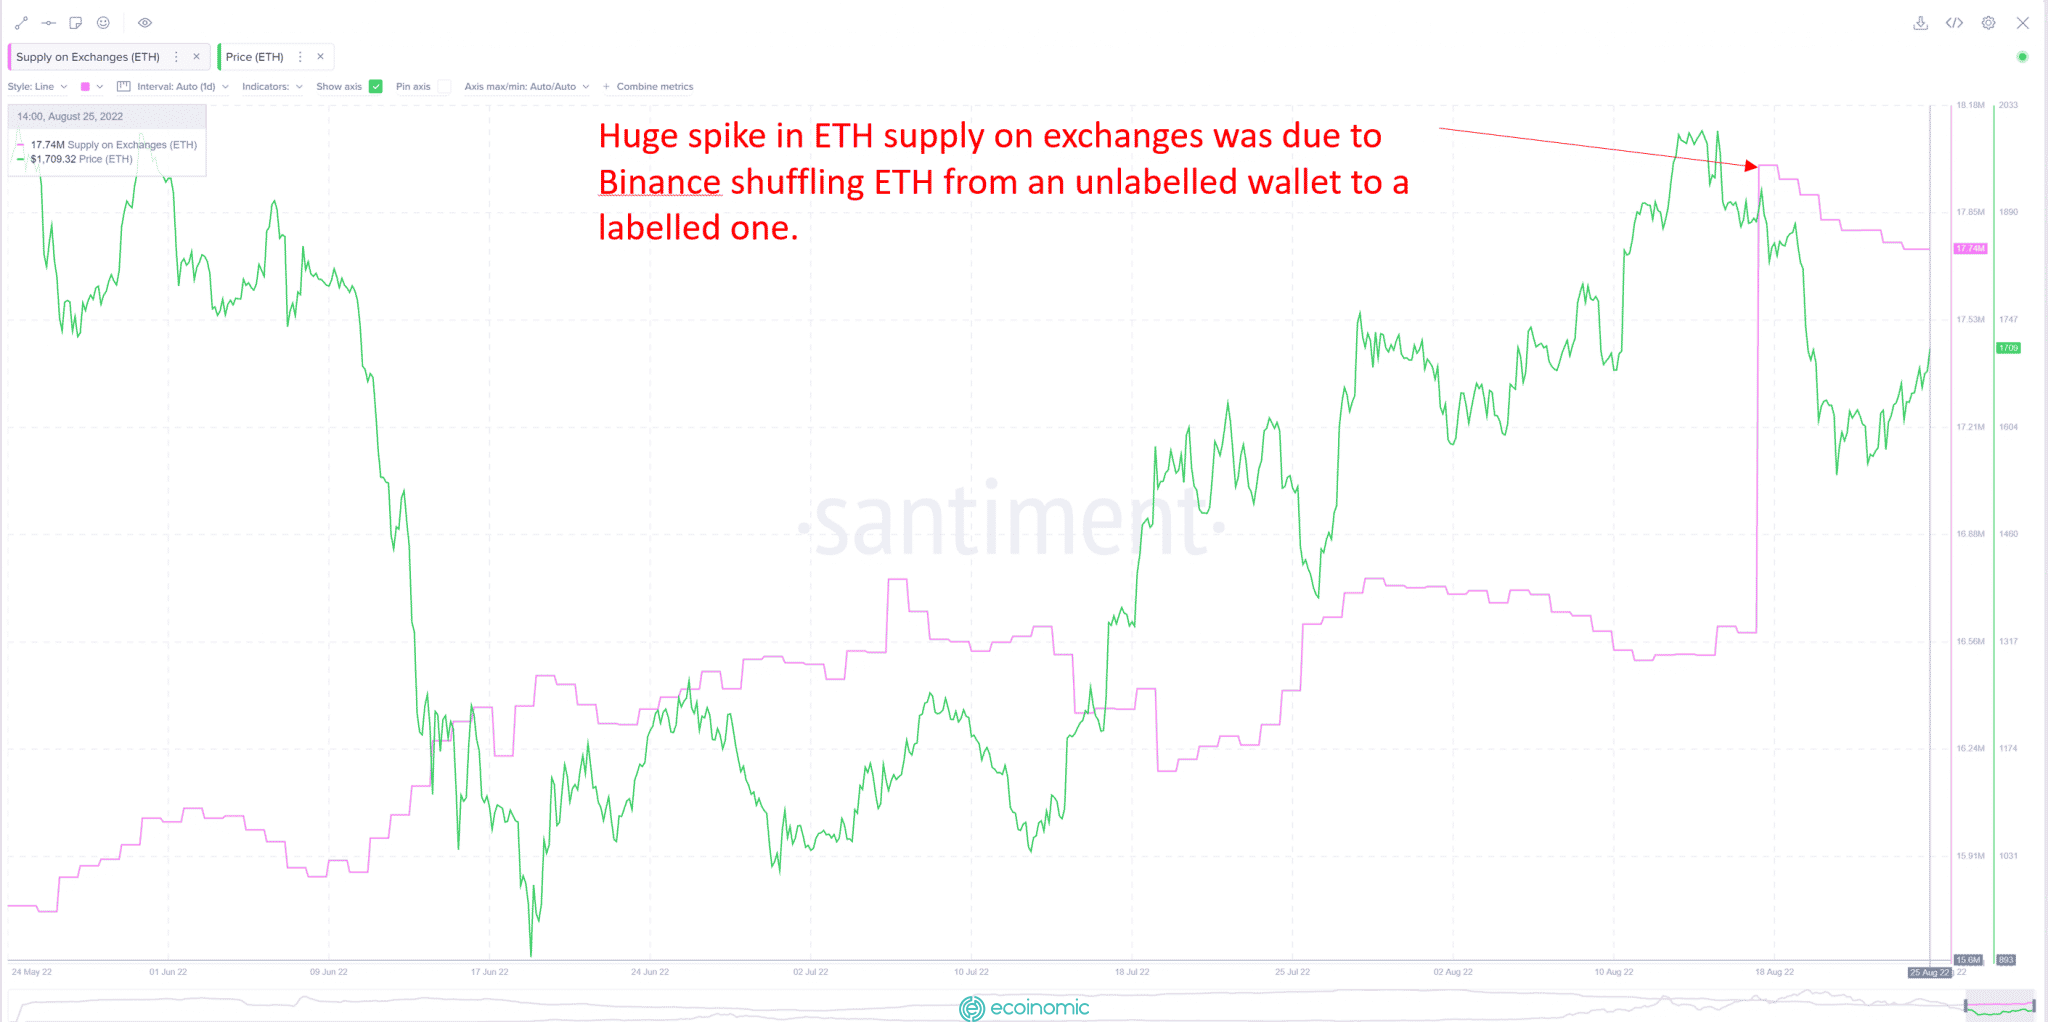 Data from Santiment on ETH